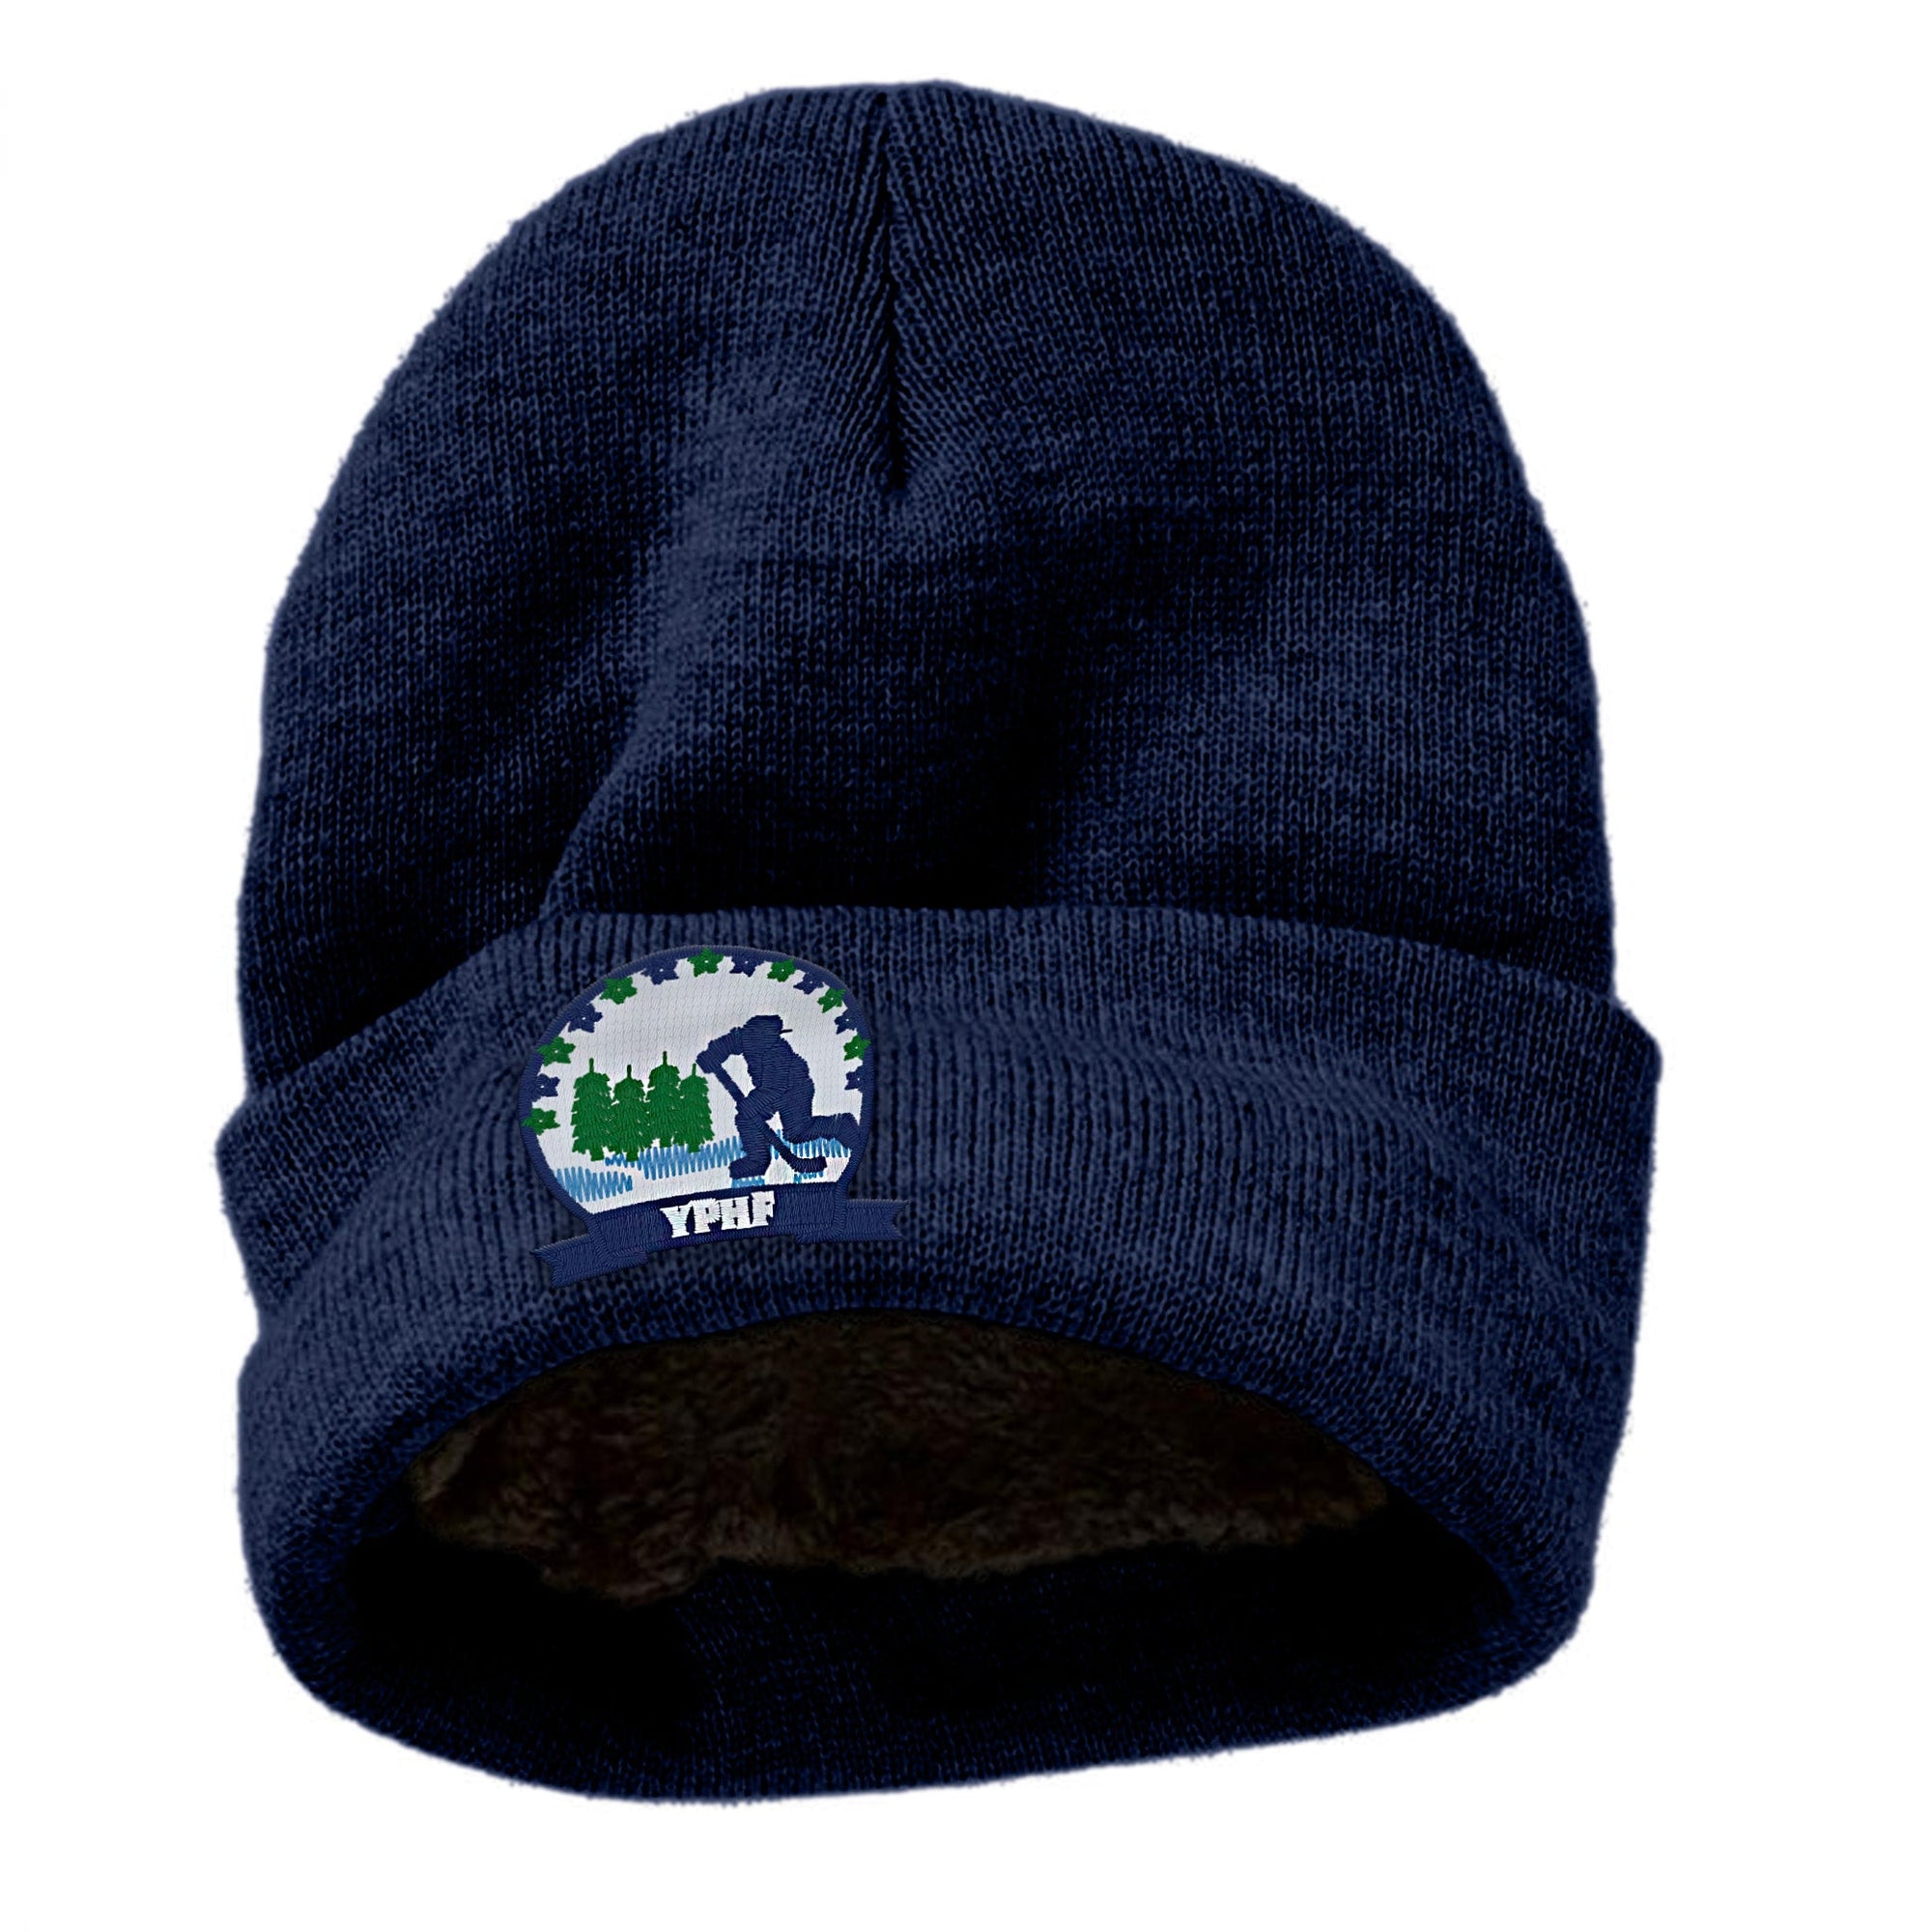 Rugby Imports YPHF Sherpa Lined Beanie